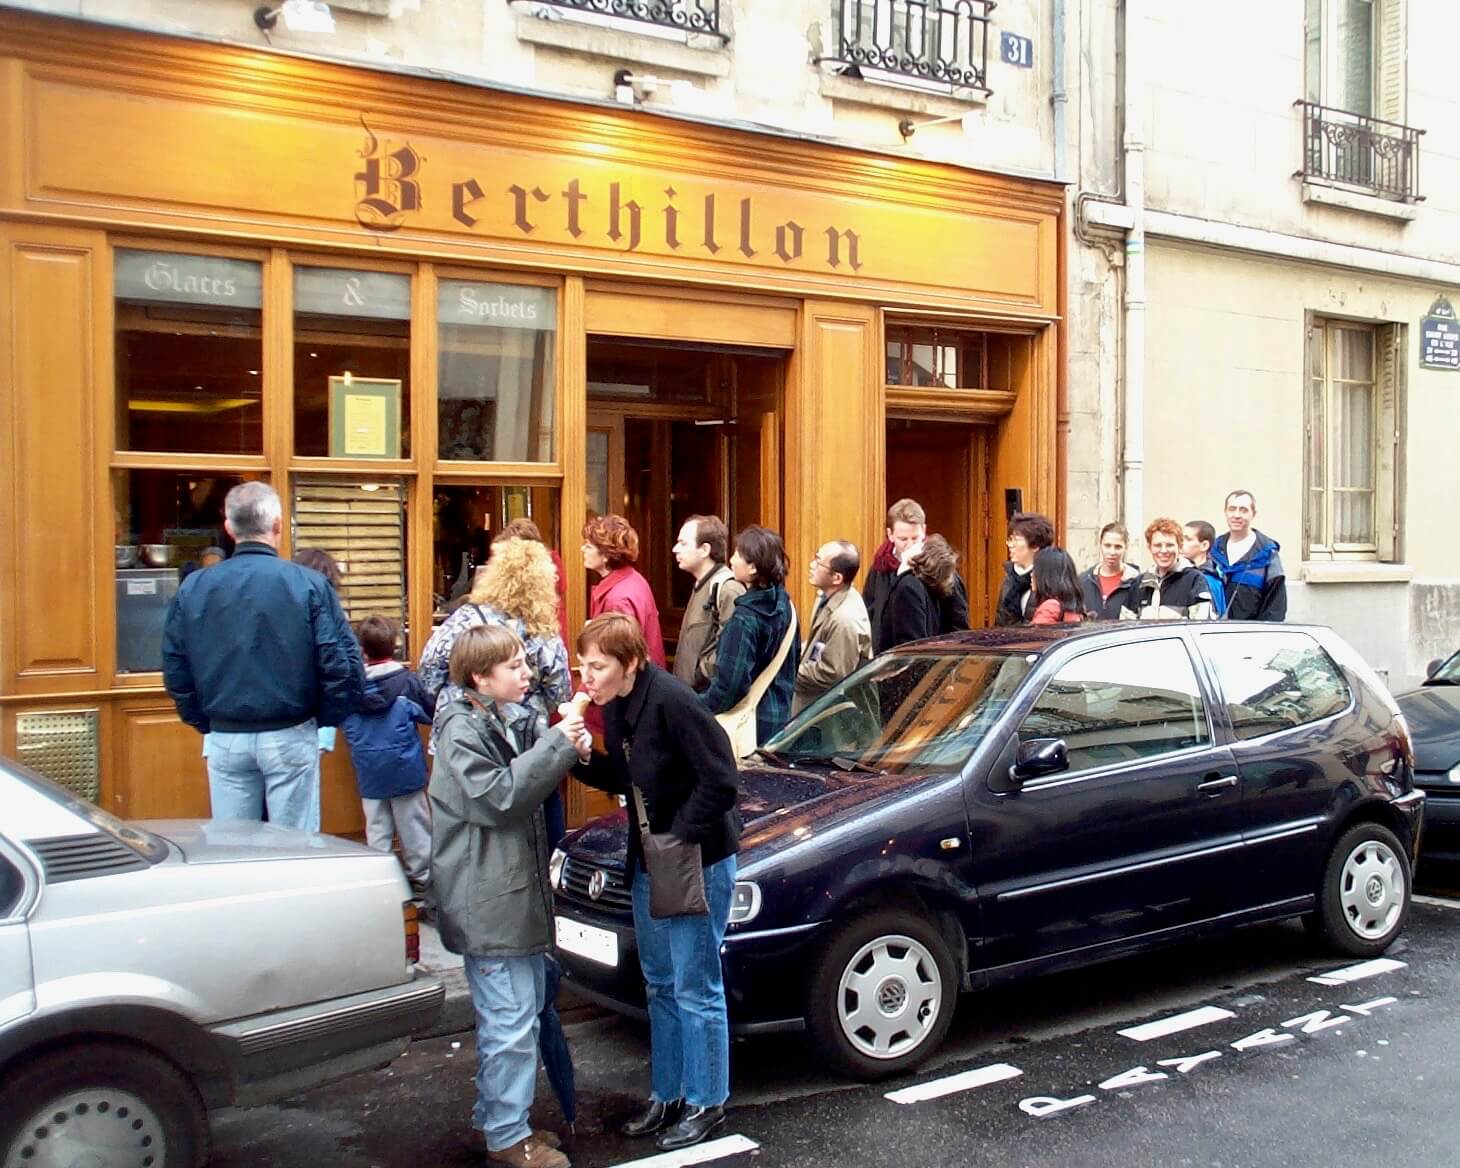 Lining up for gourmet ice cream at Berthillon on Île Saint-Louis